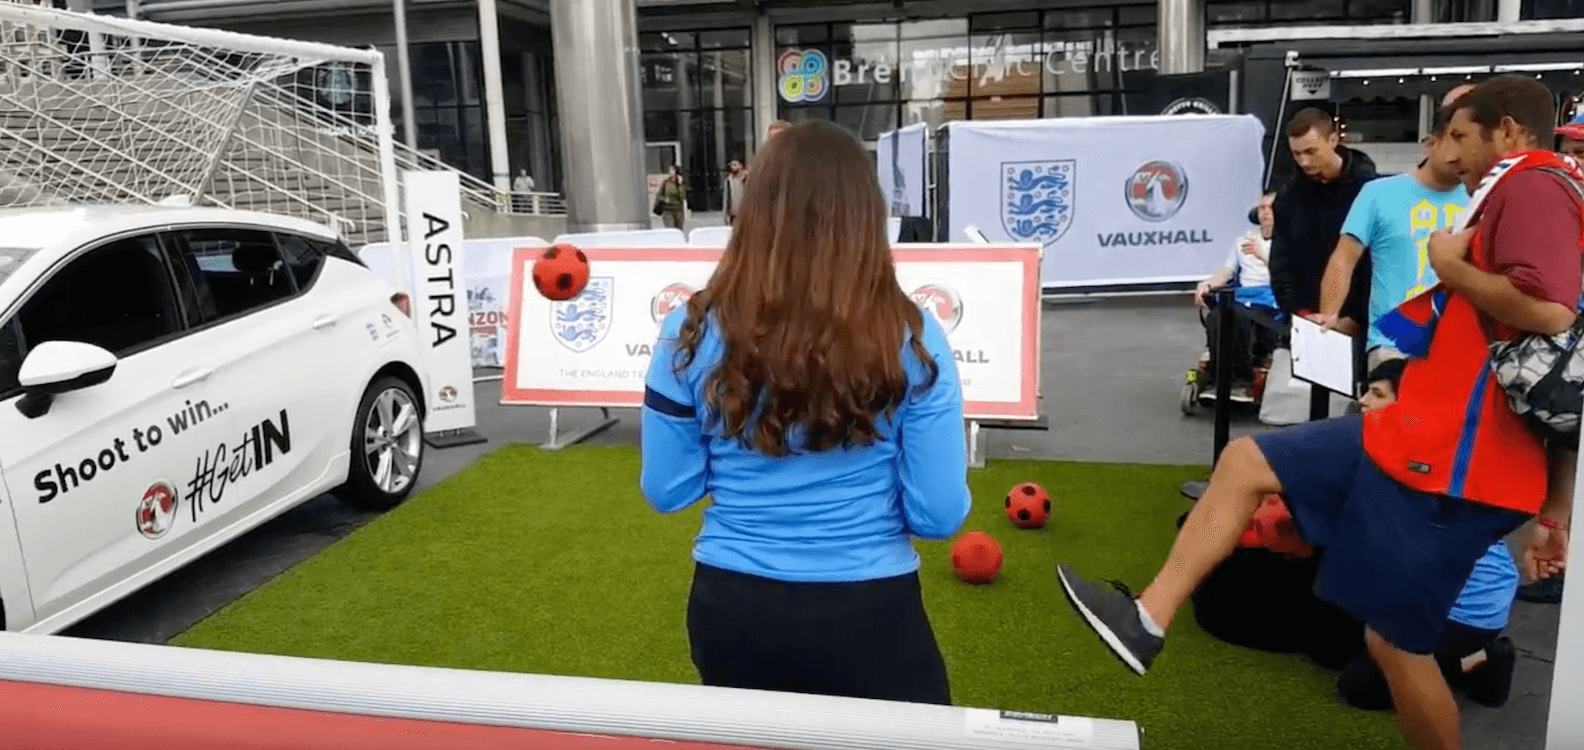 Activities - London Themed Football Events